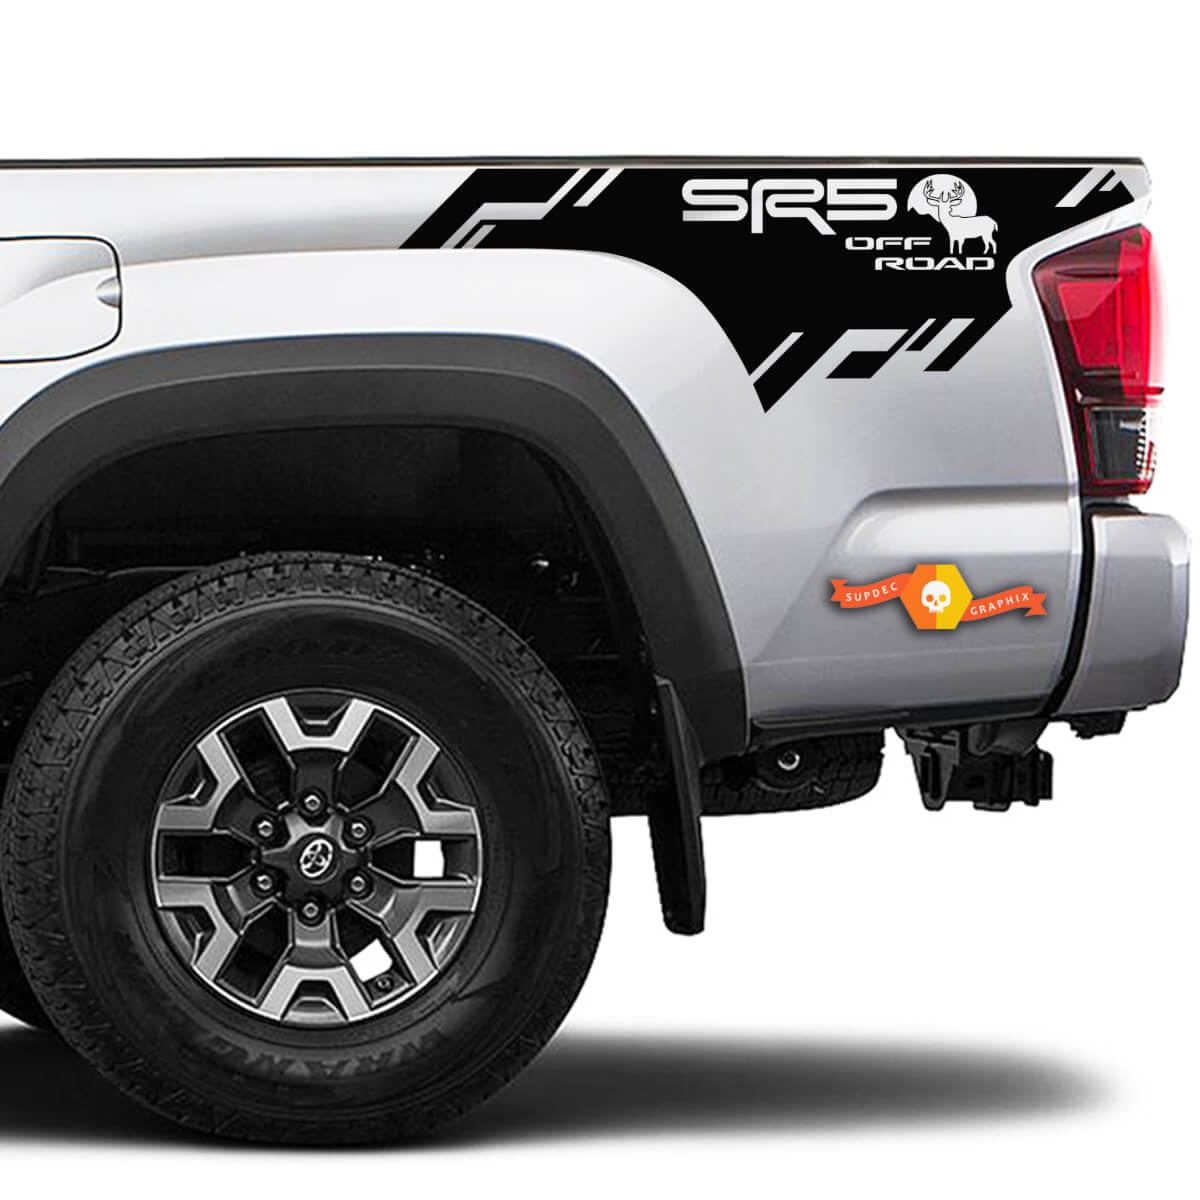 2 Toyota Tacoma 2016-2022+ SR5 OF-ROAD Deer Bed Side Bed Stripes Vinyl Stickers Decal for Toyota Tacoma